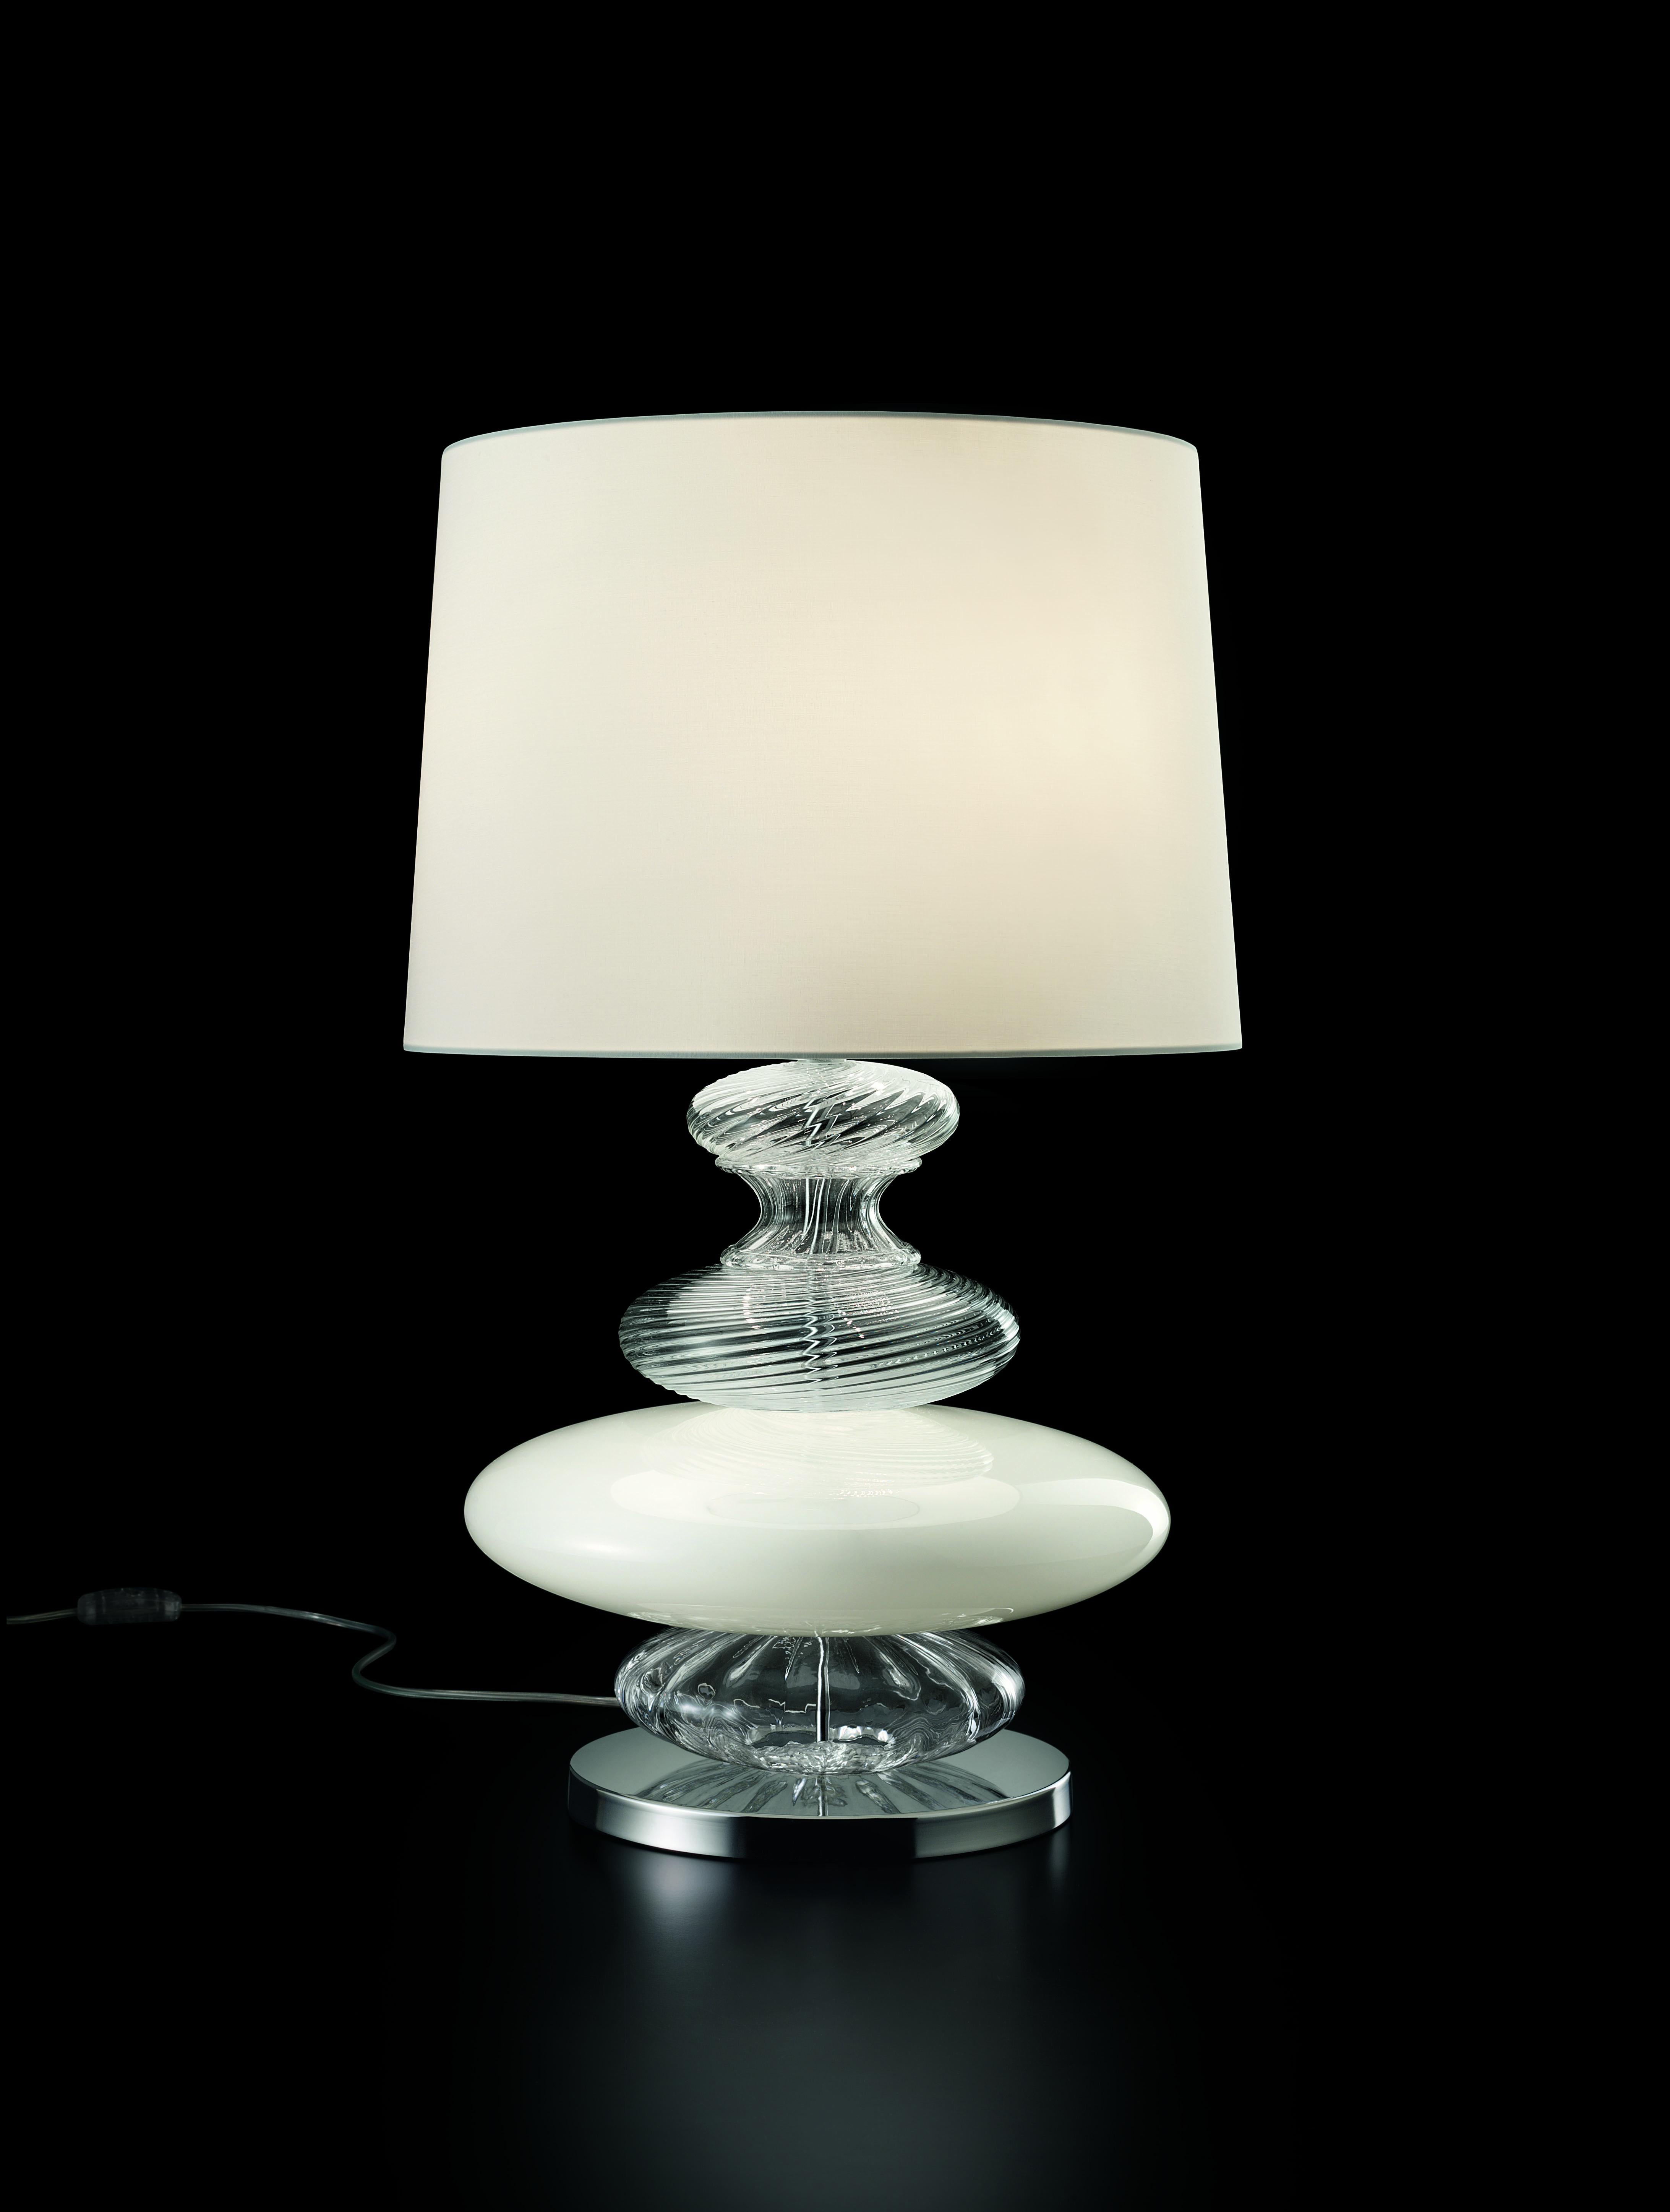 Italian Pigalle 5678 Table Lamp in White/Crystal Glass, White Shade, by Barovier&Toso